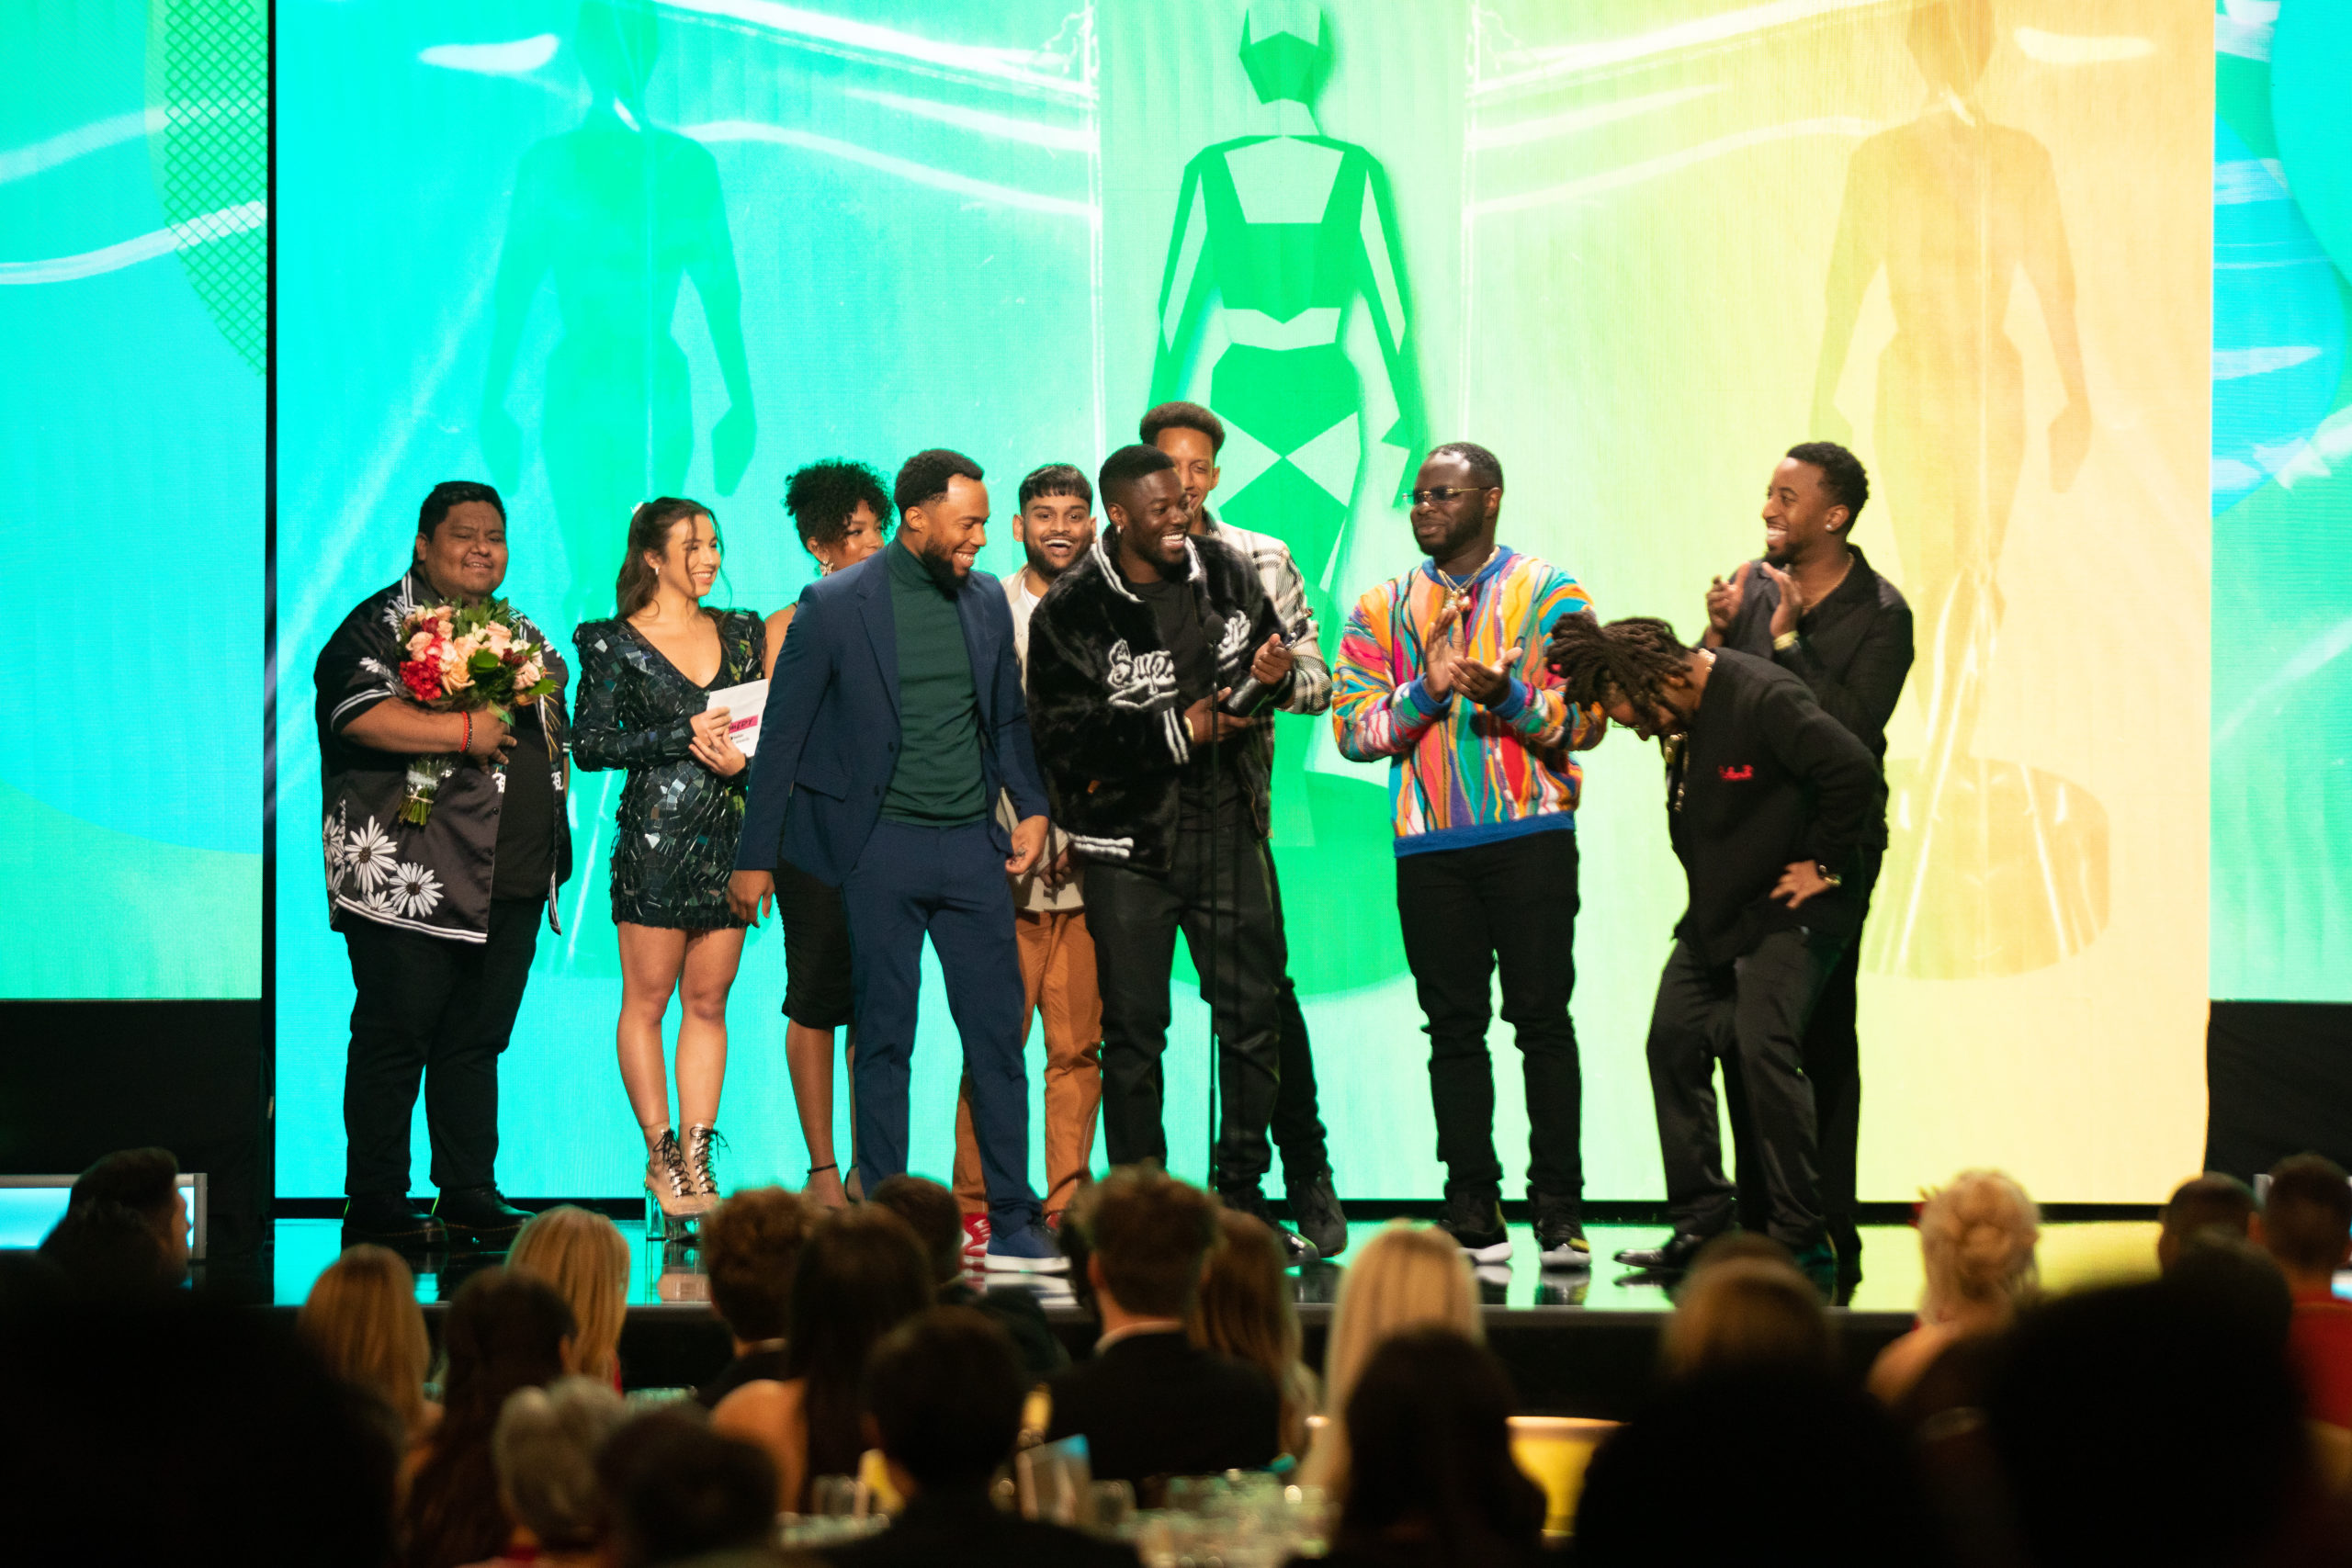 Group of men accept an award on stage with green background.